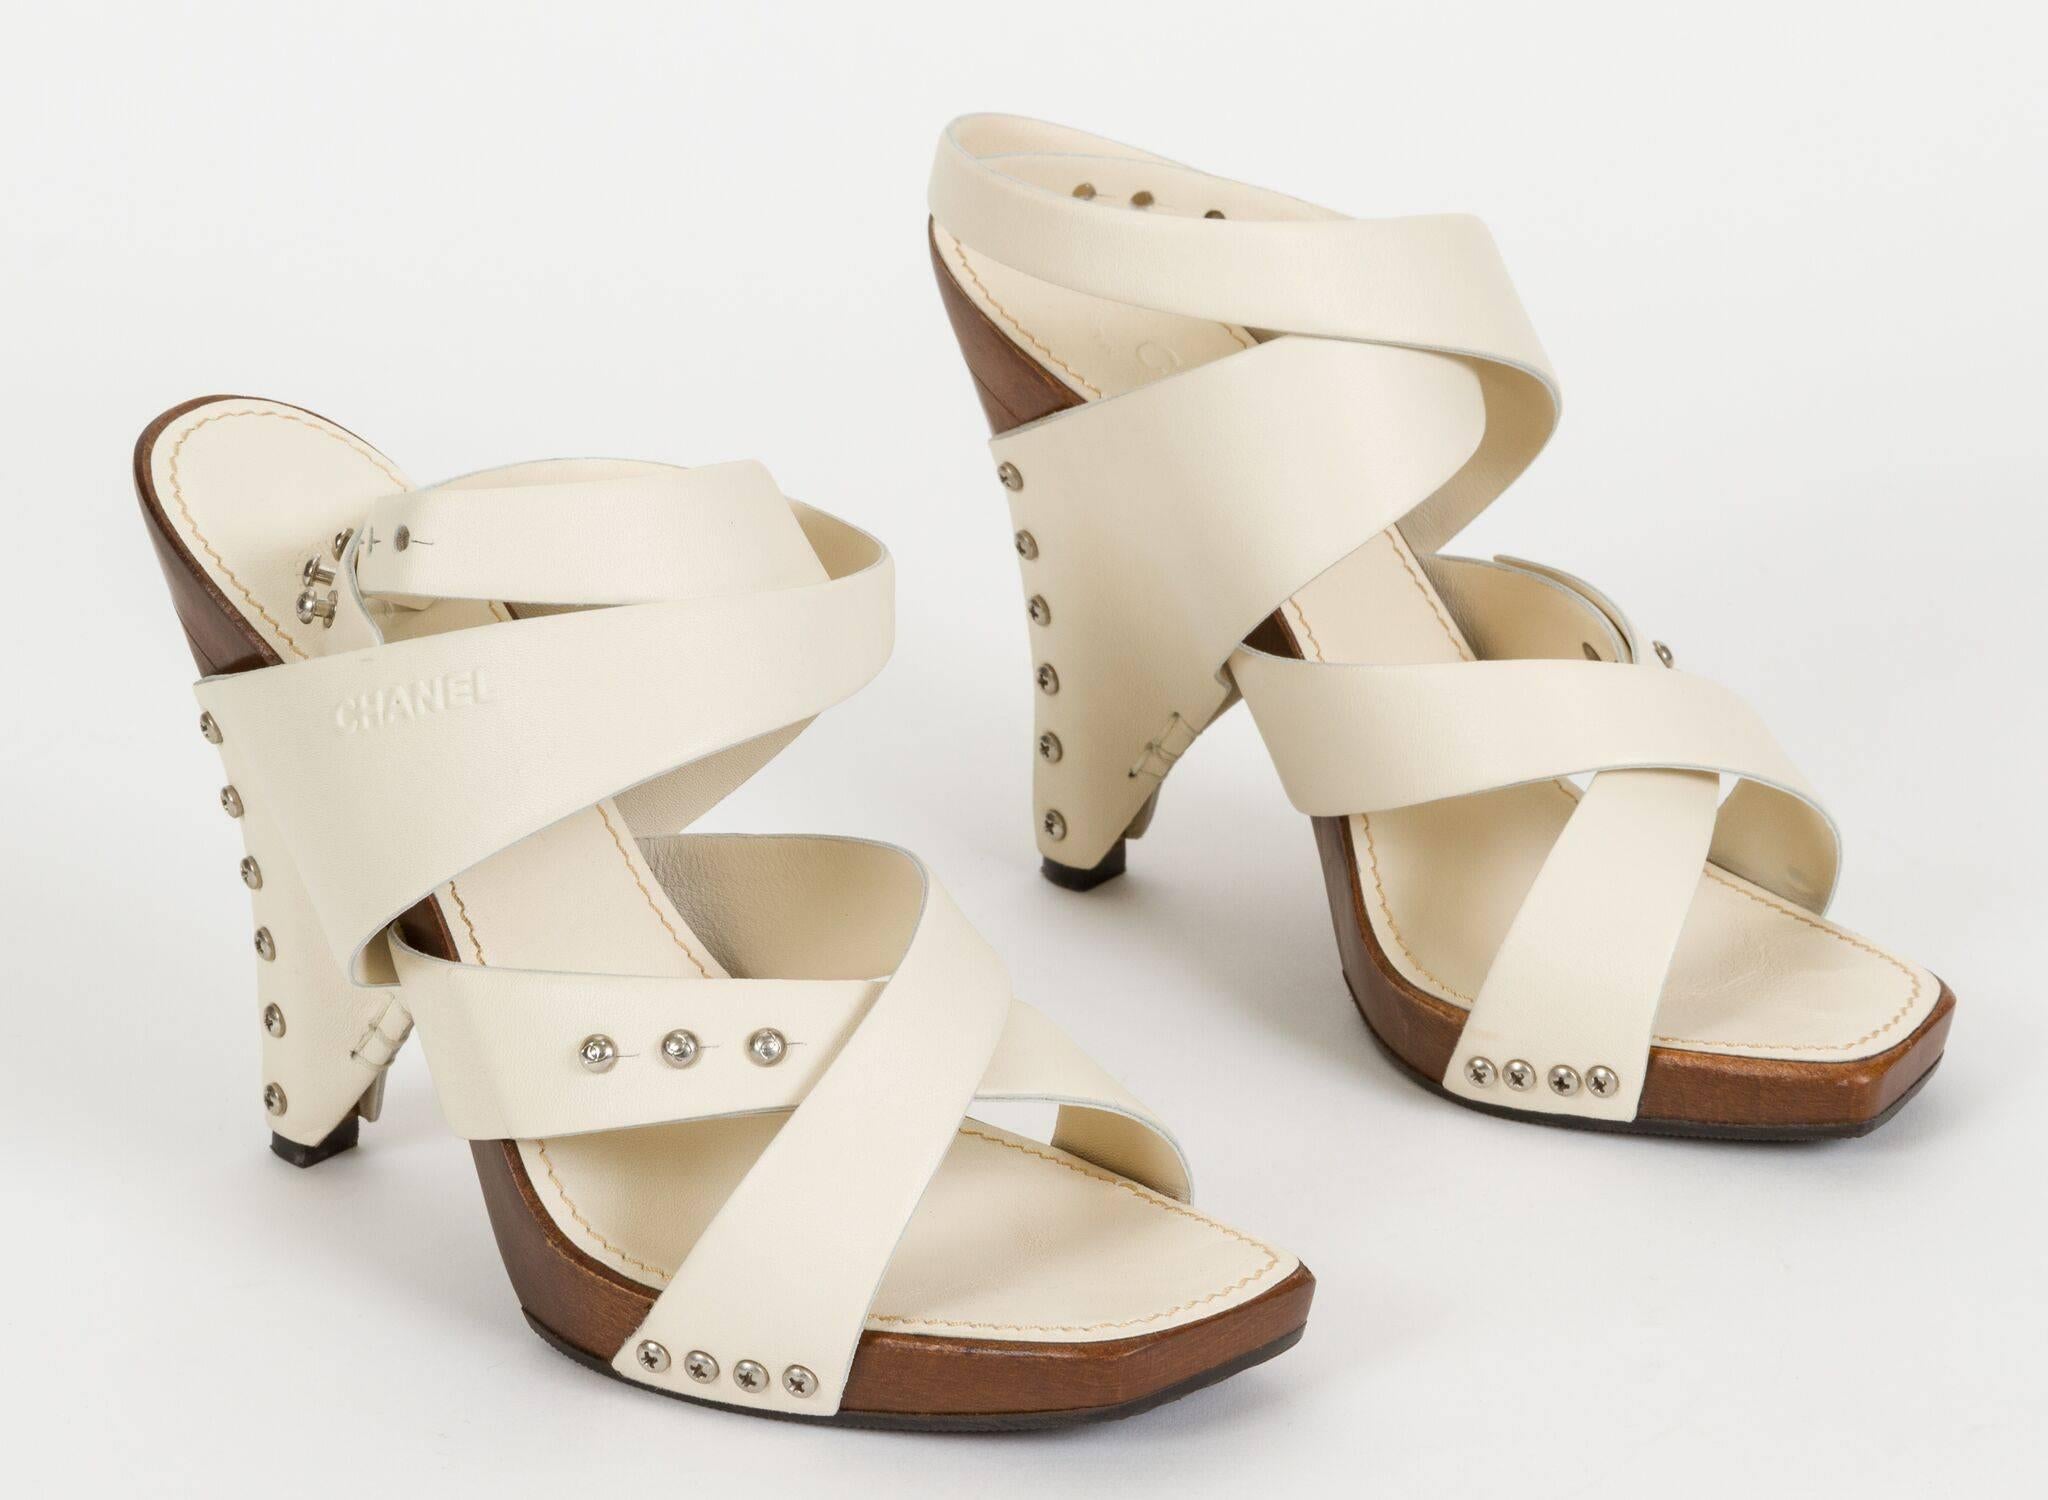 Chanel Cream Leather & Wood Sandals 37.5 In New Condition For Sale In West Hollywood, CA